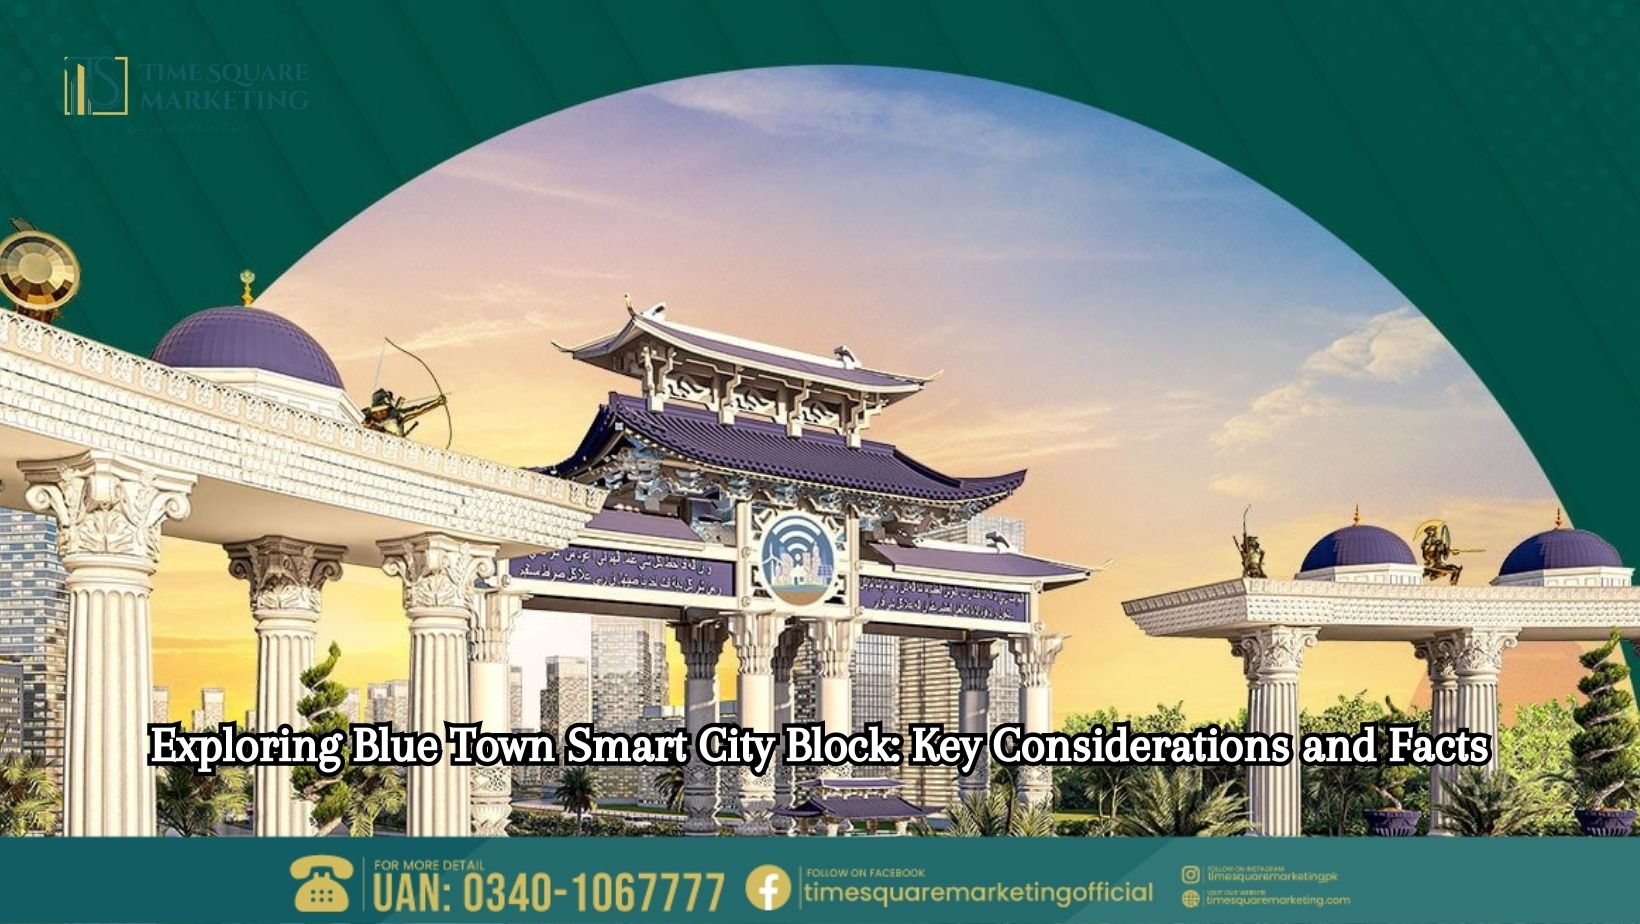 Exploring Blue Town Smart City Block Key Considerations and Facts